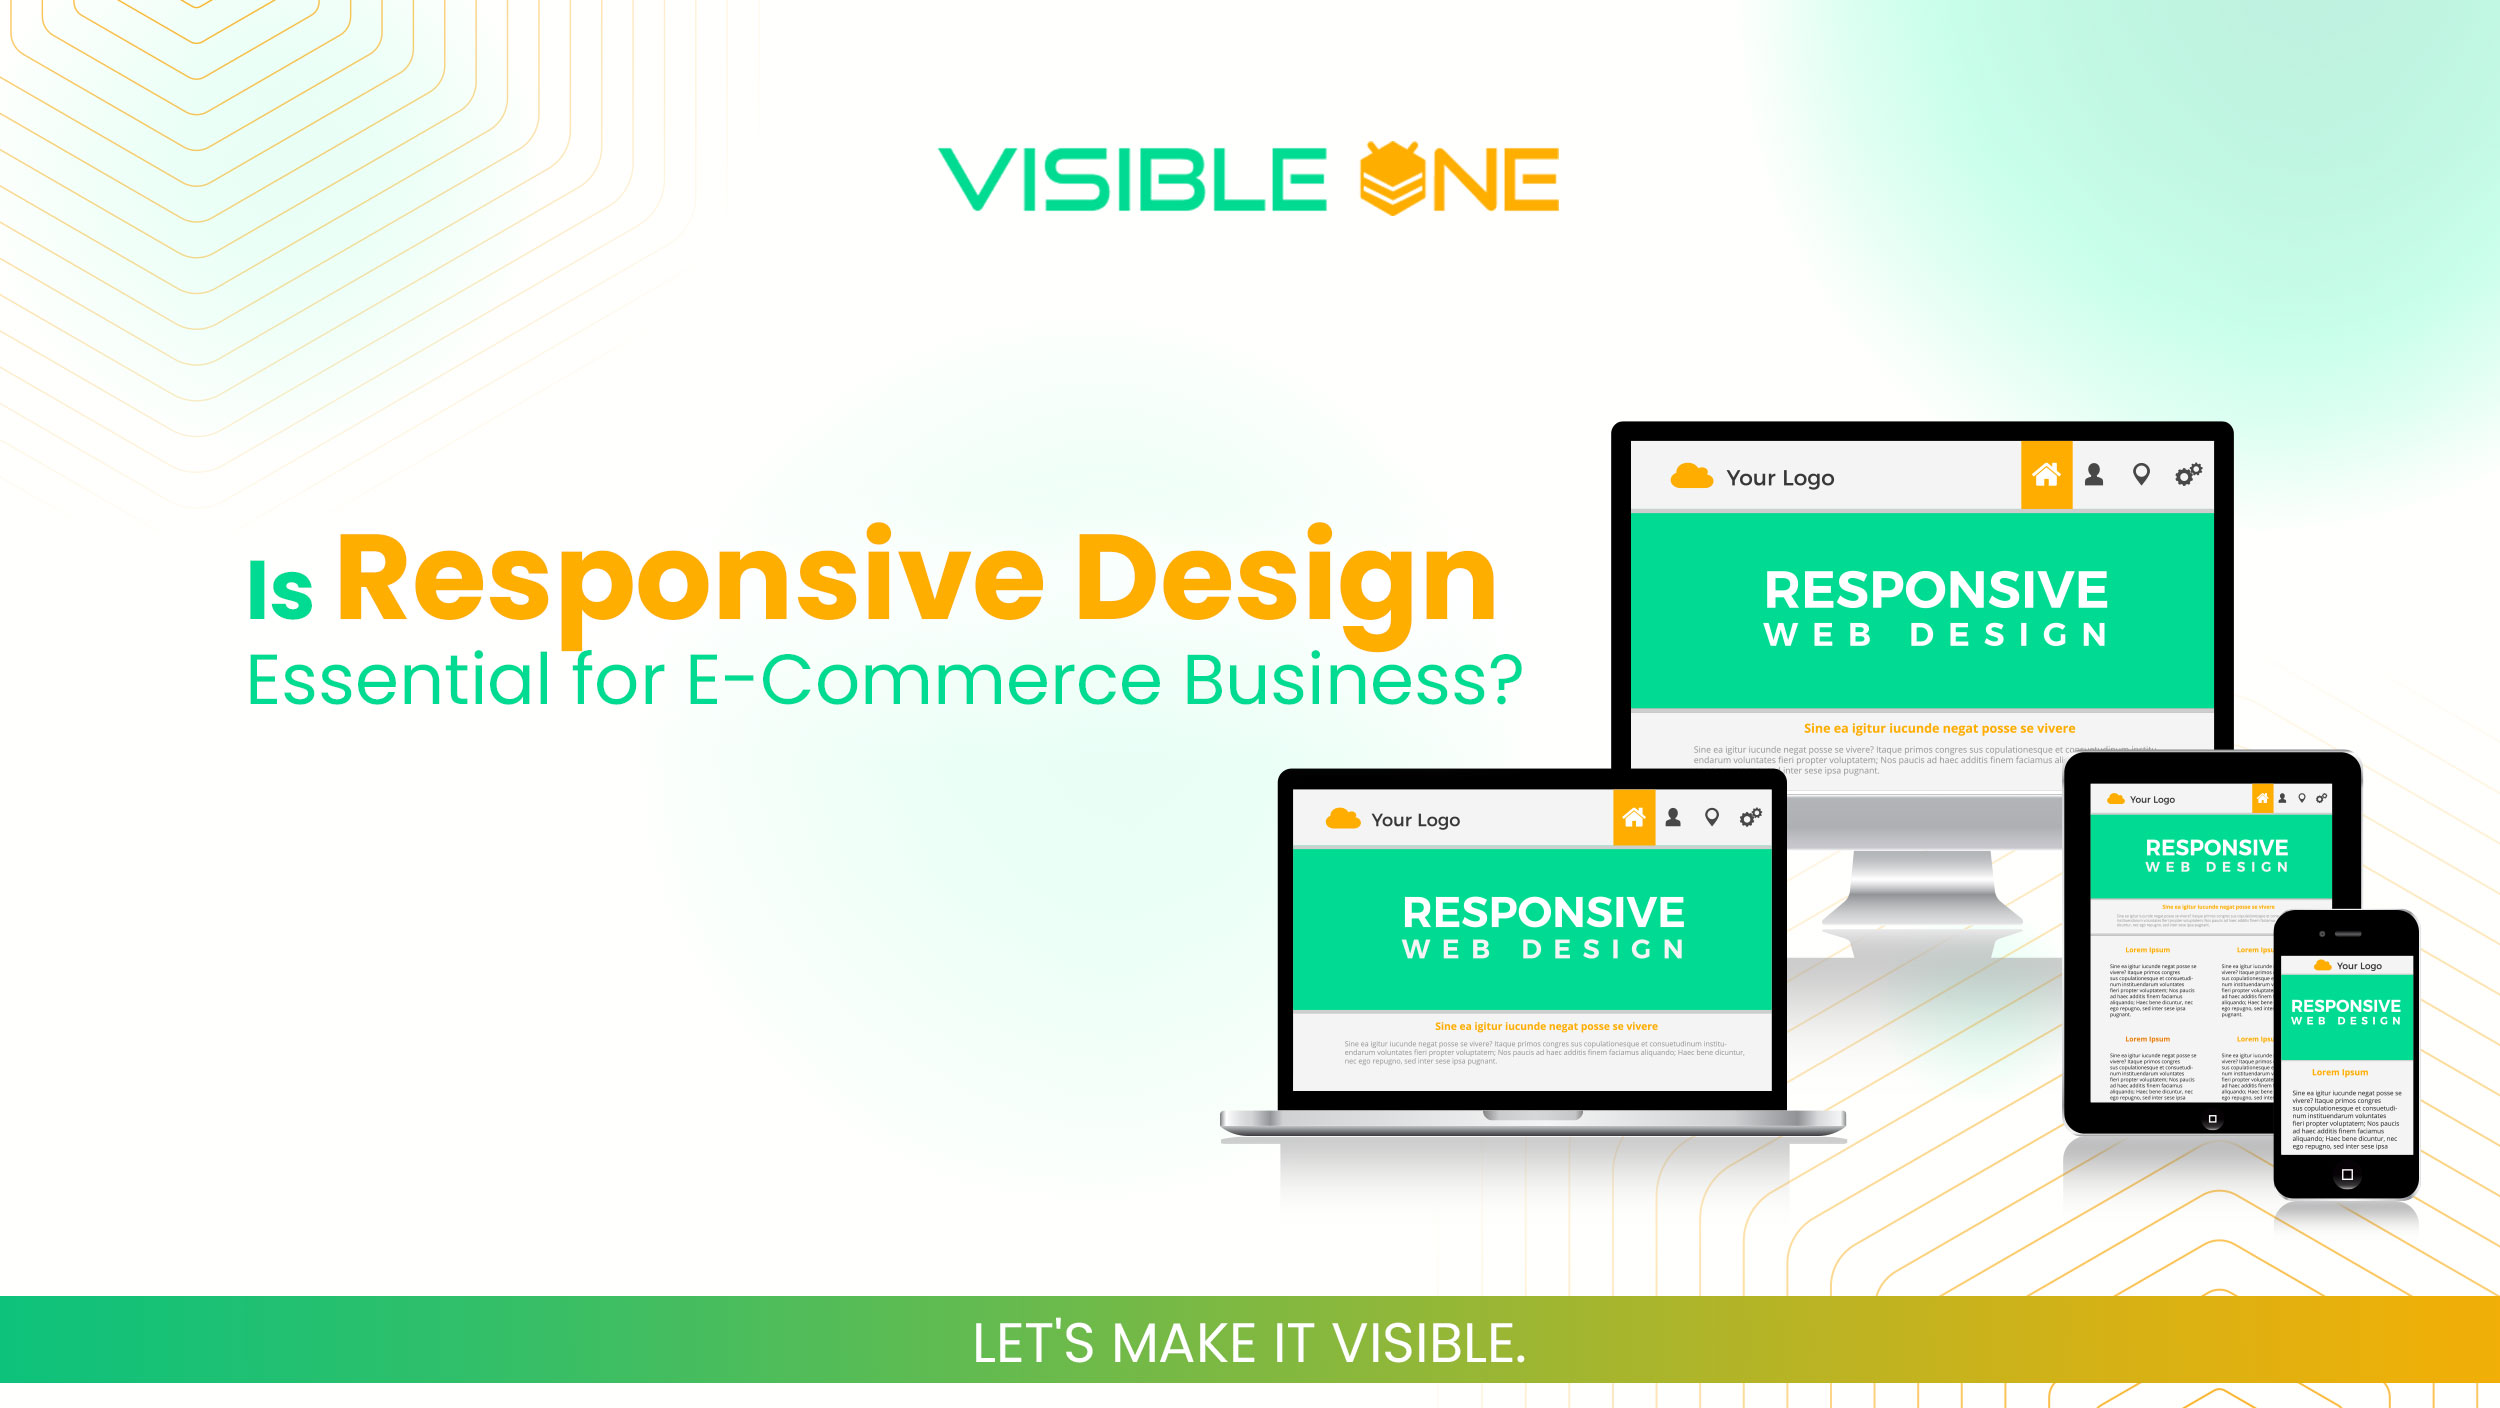 Is Responsive Design Essential for E-Commerce Business?